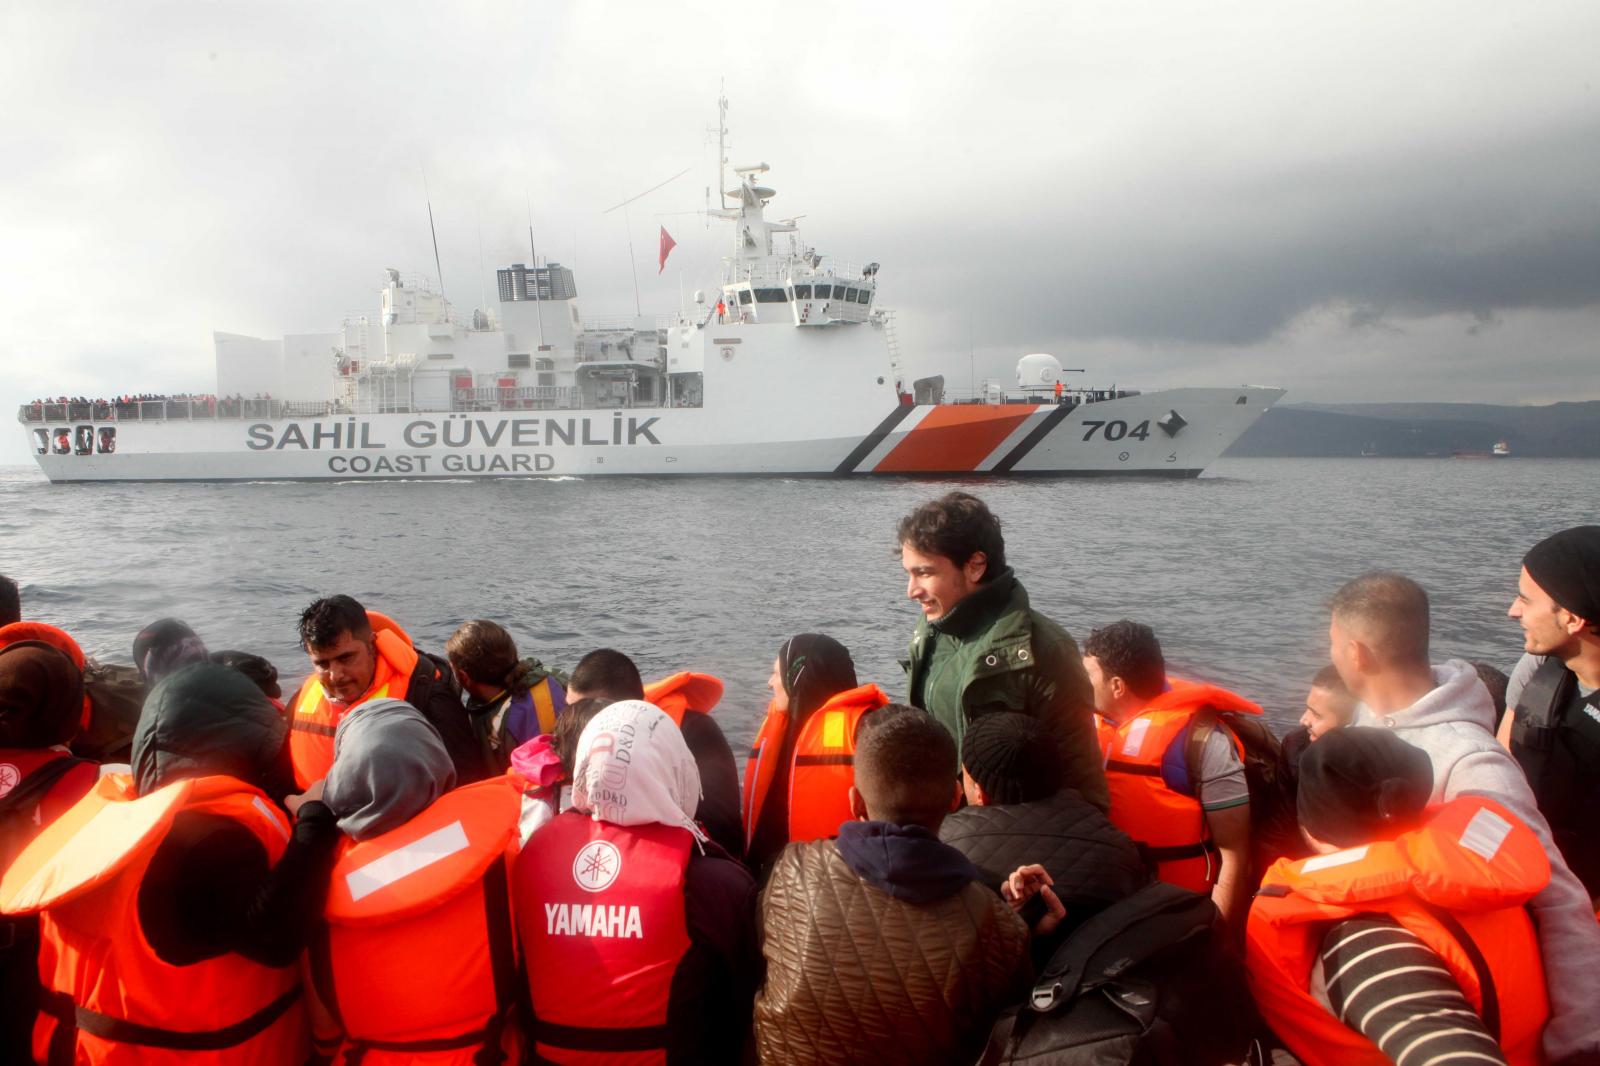 Refugees in the Aegean - 